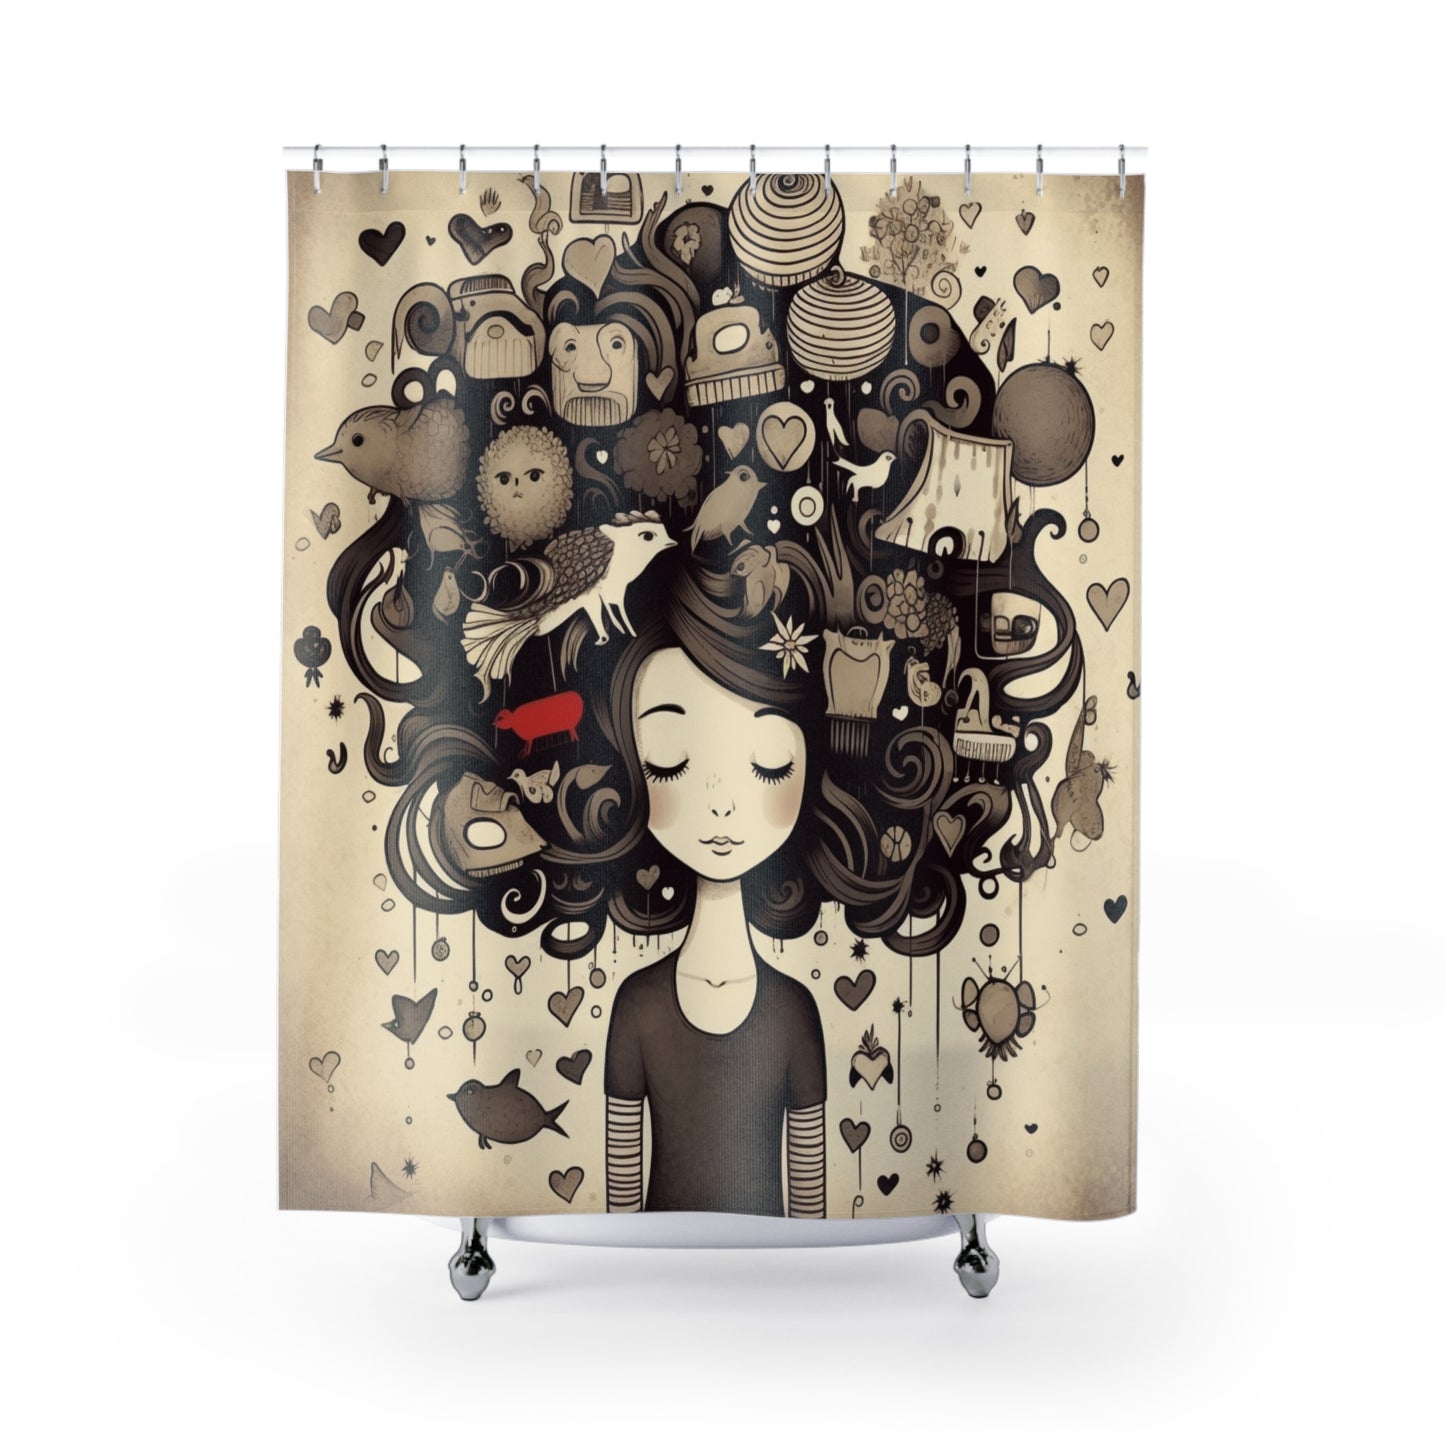 Find Tranquility in the Busy Mind Girl Shower Curtain